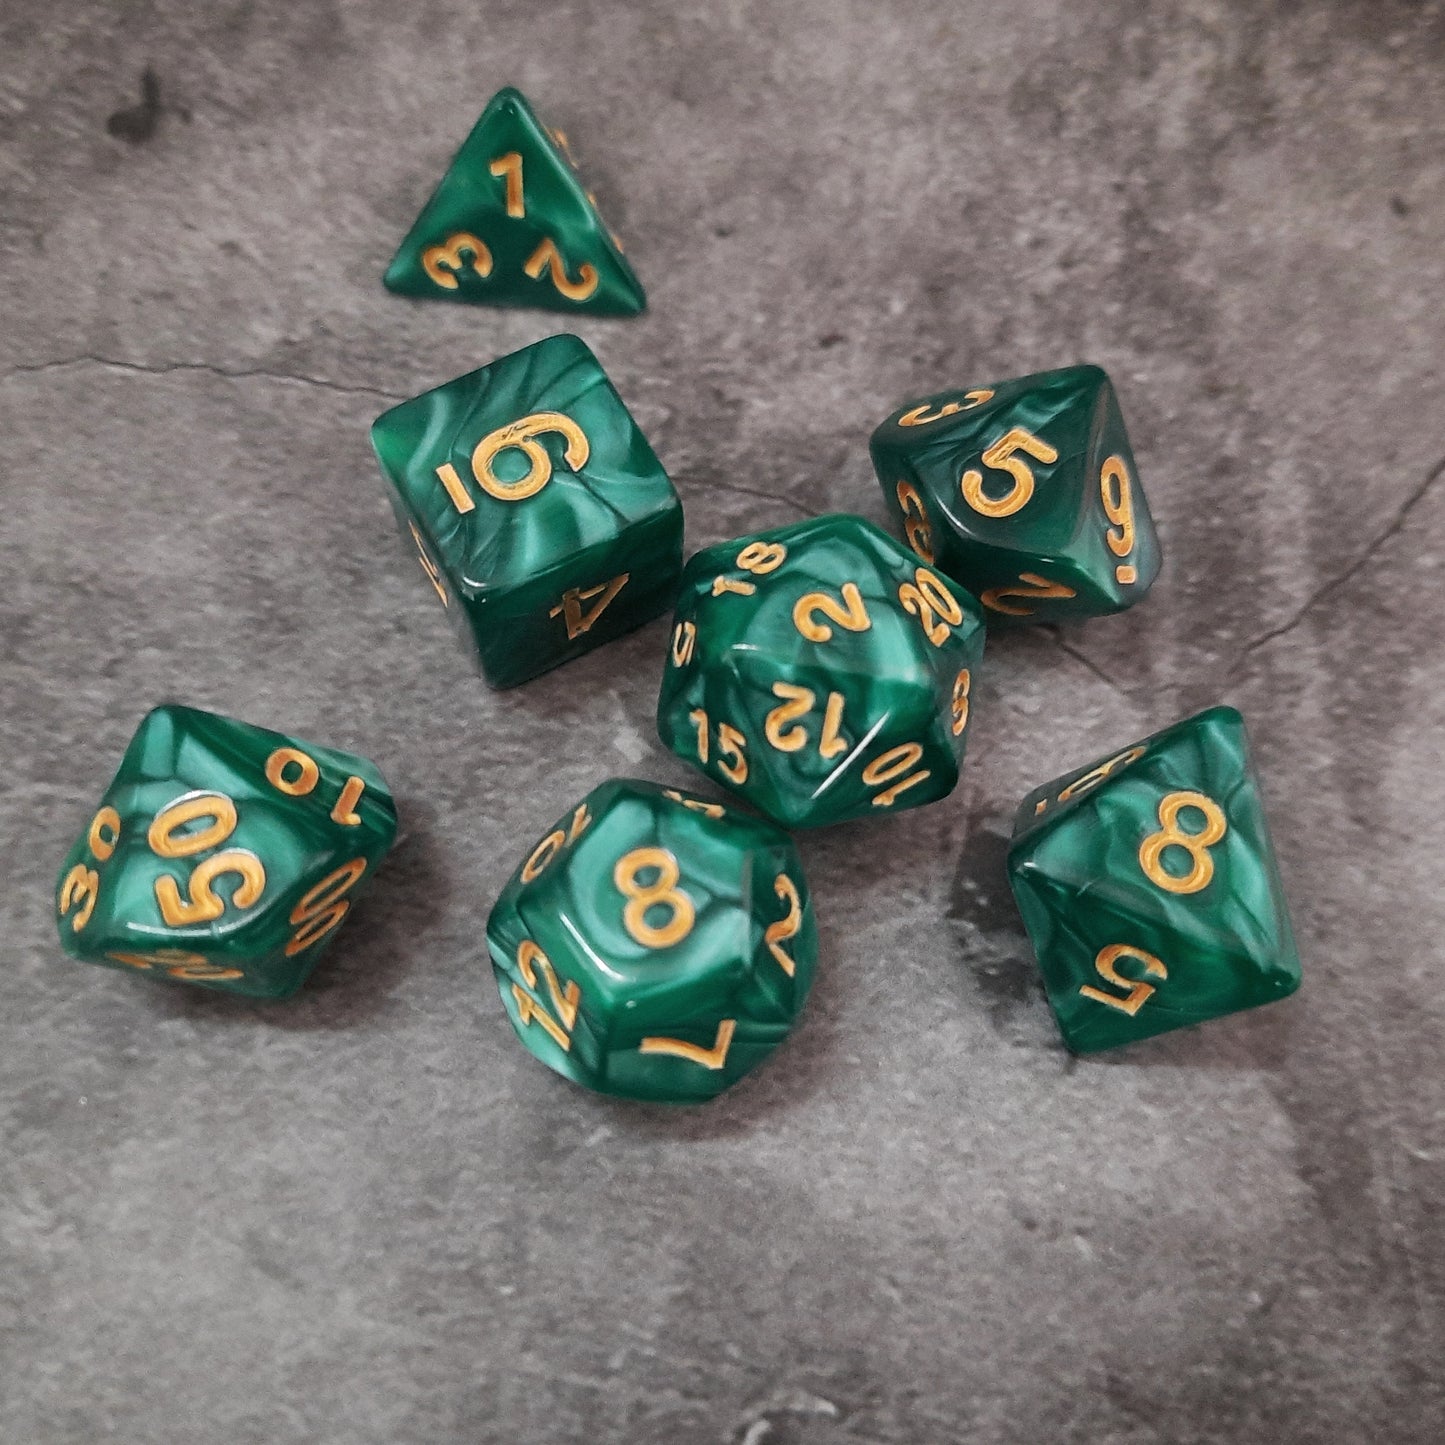 Dice set, many beautiful colors available!